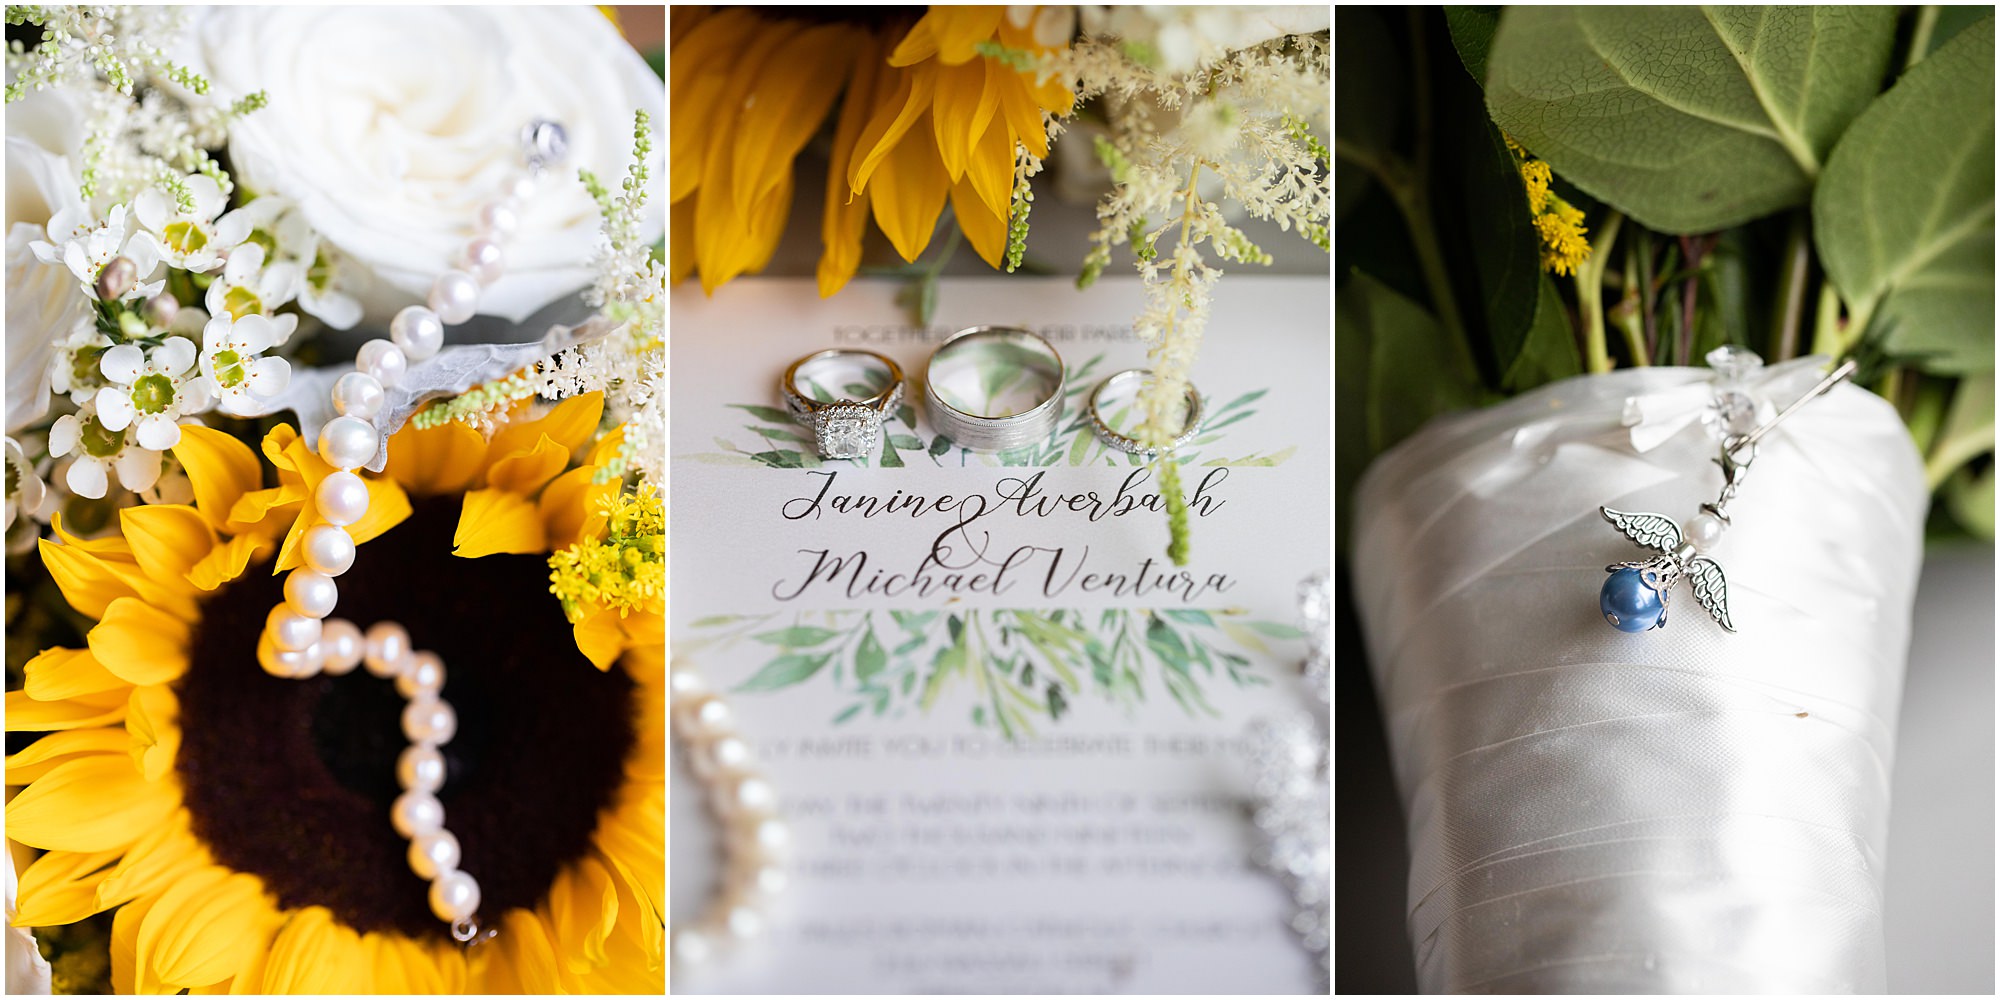 Bridal details at Summer wedding with sunflowers.